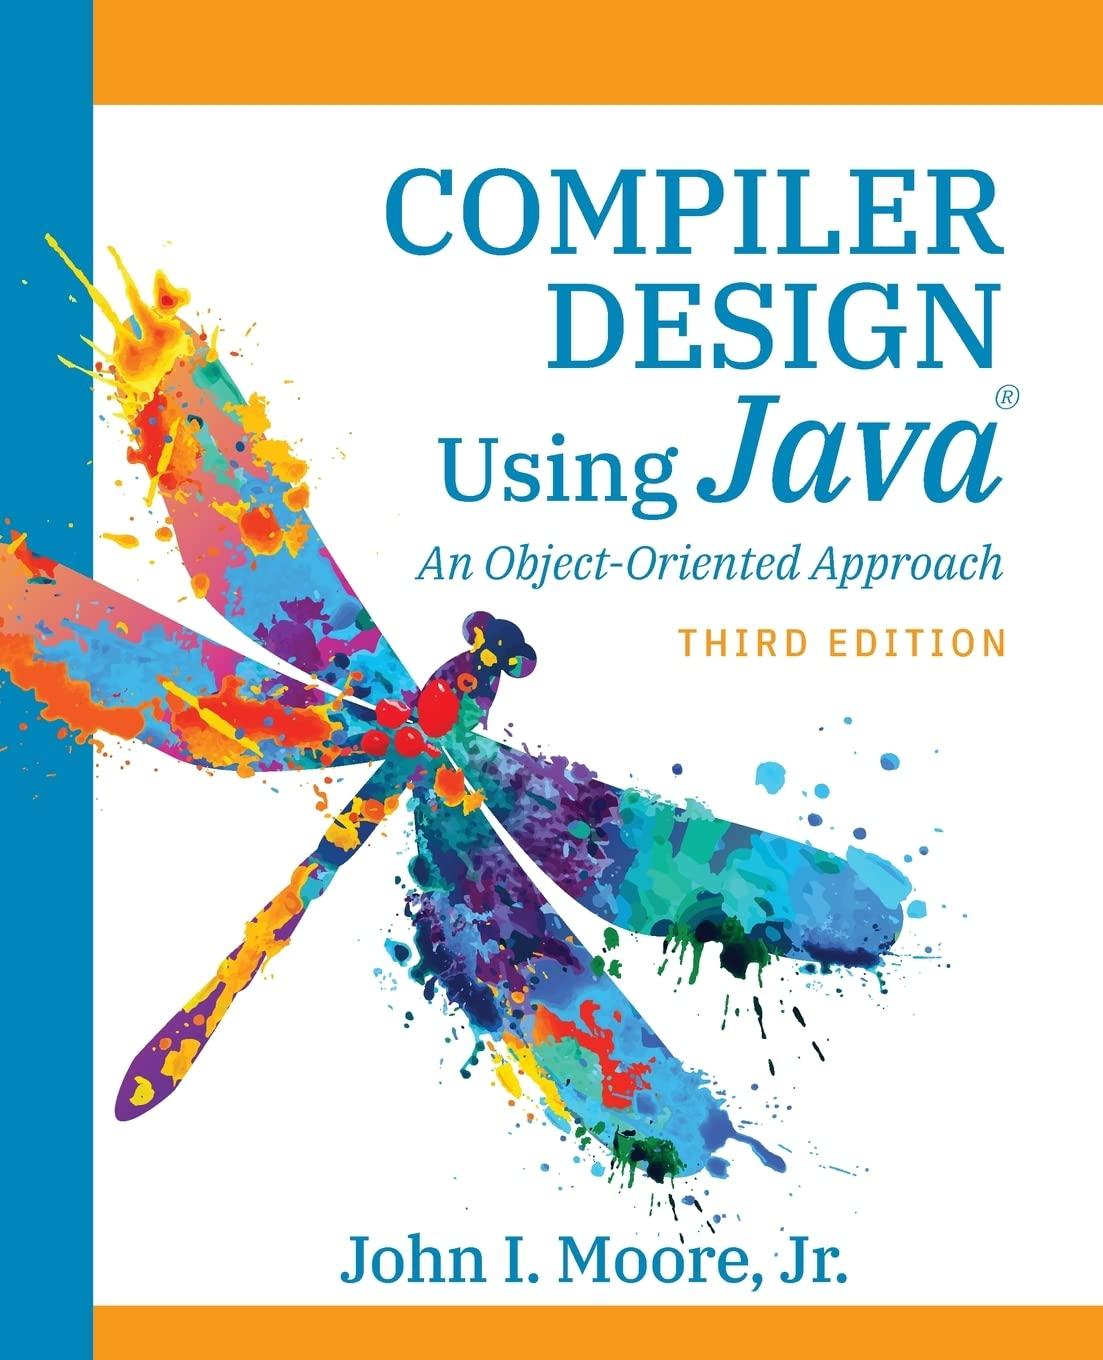 compiler design using java an object oriented approach 3rd edition john i moore 1734139129, 9781734139129